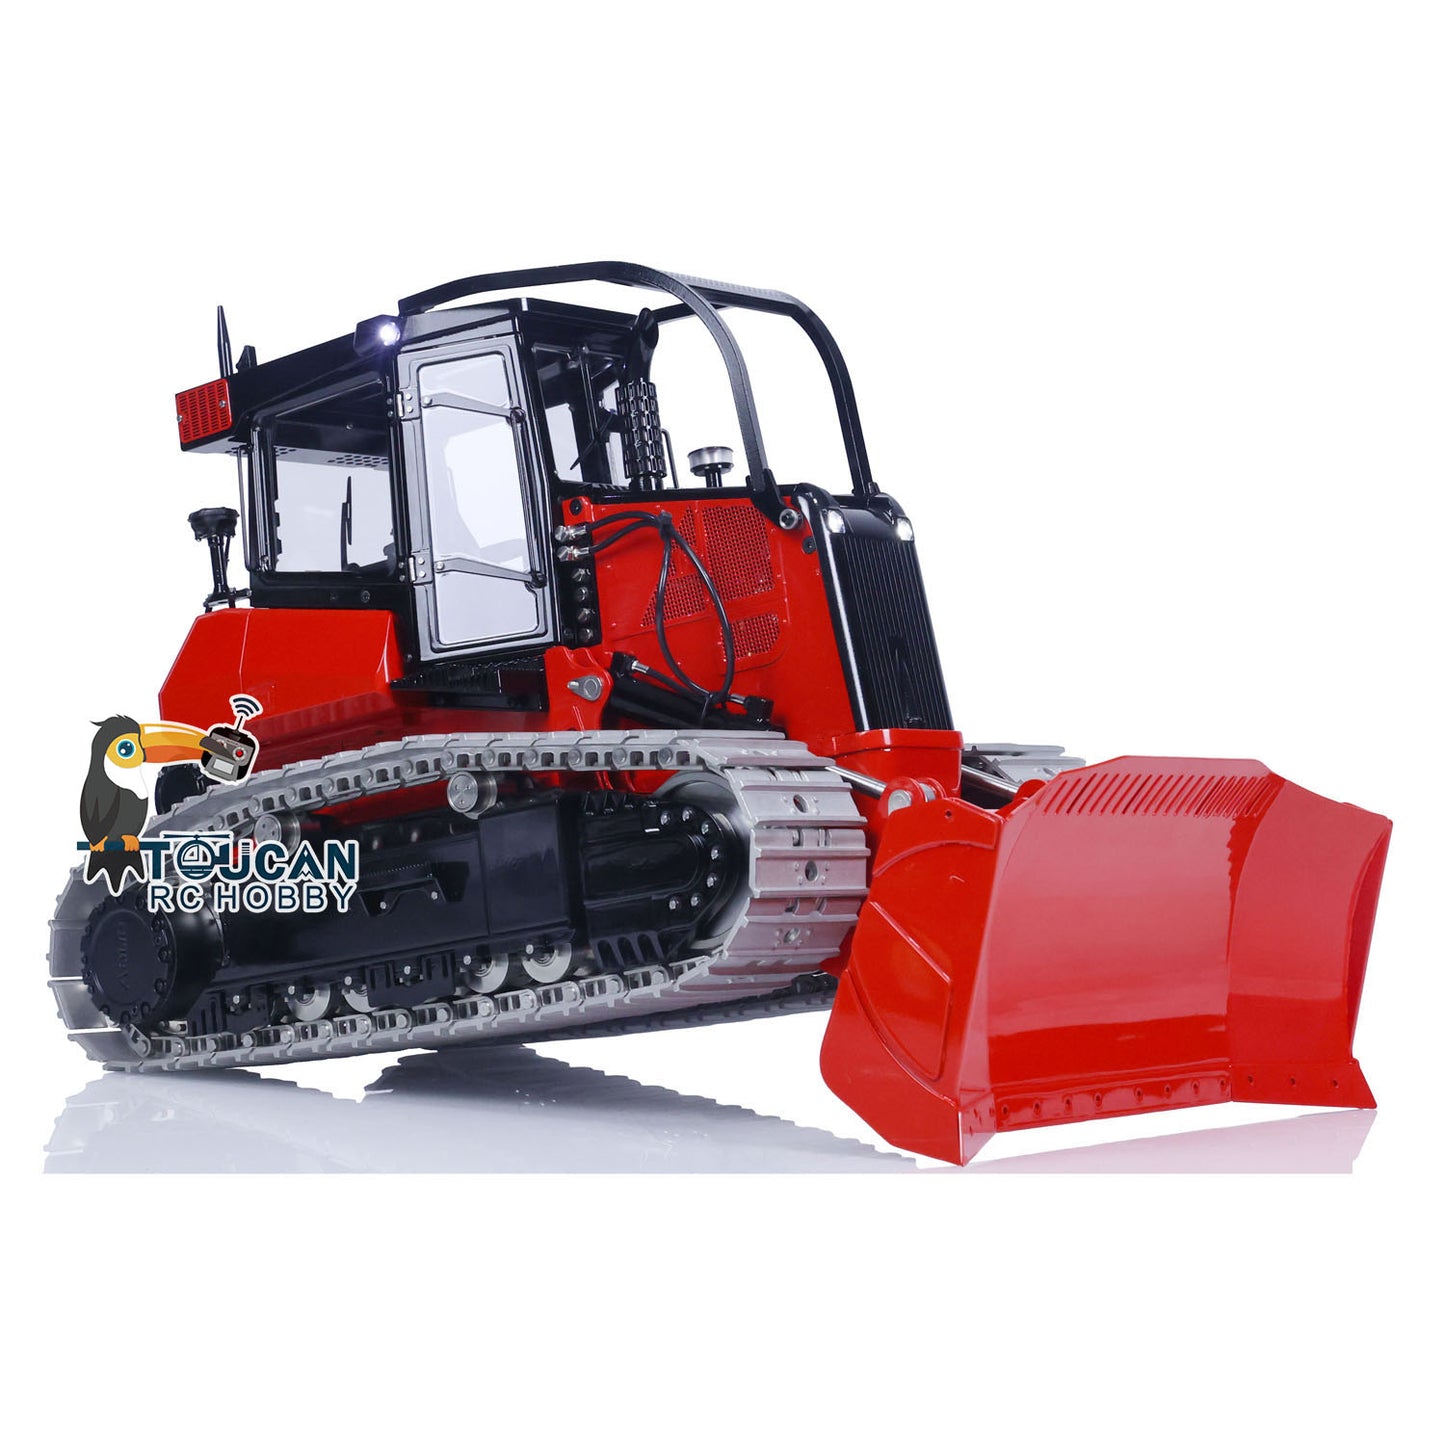 LESU Metal 1/14 Hydraulic RC Bulldozer Aoue 850K RTR Remote Control Dozer Hobby Model Electric Car Painted Assembled